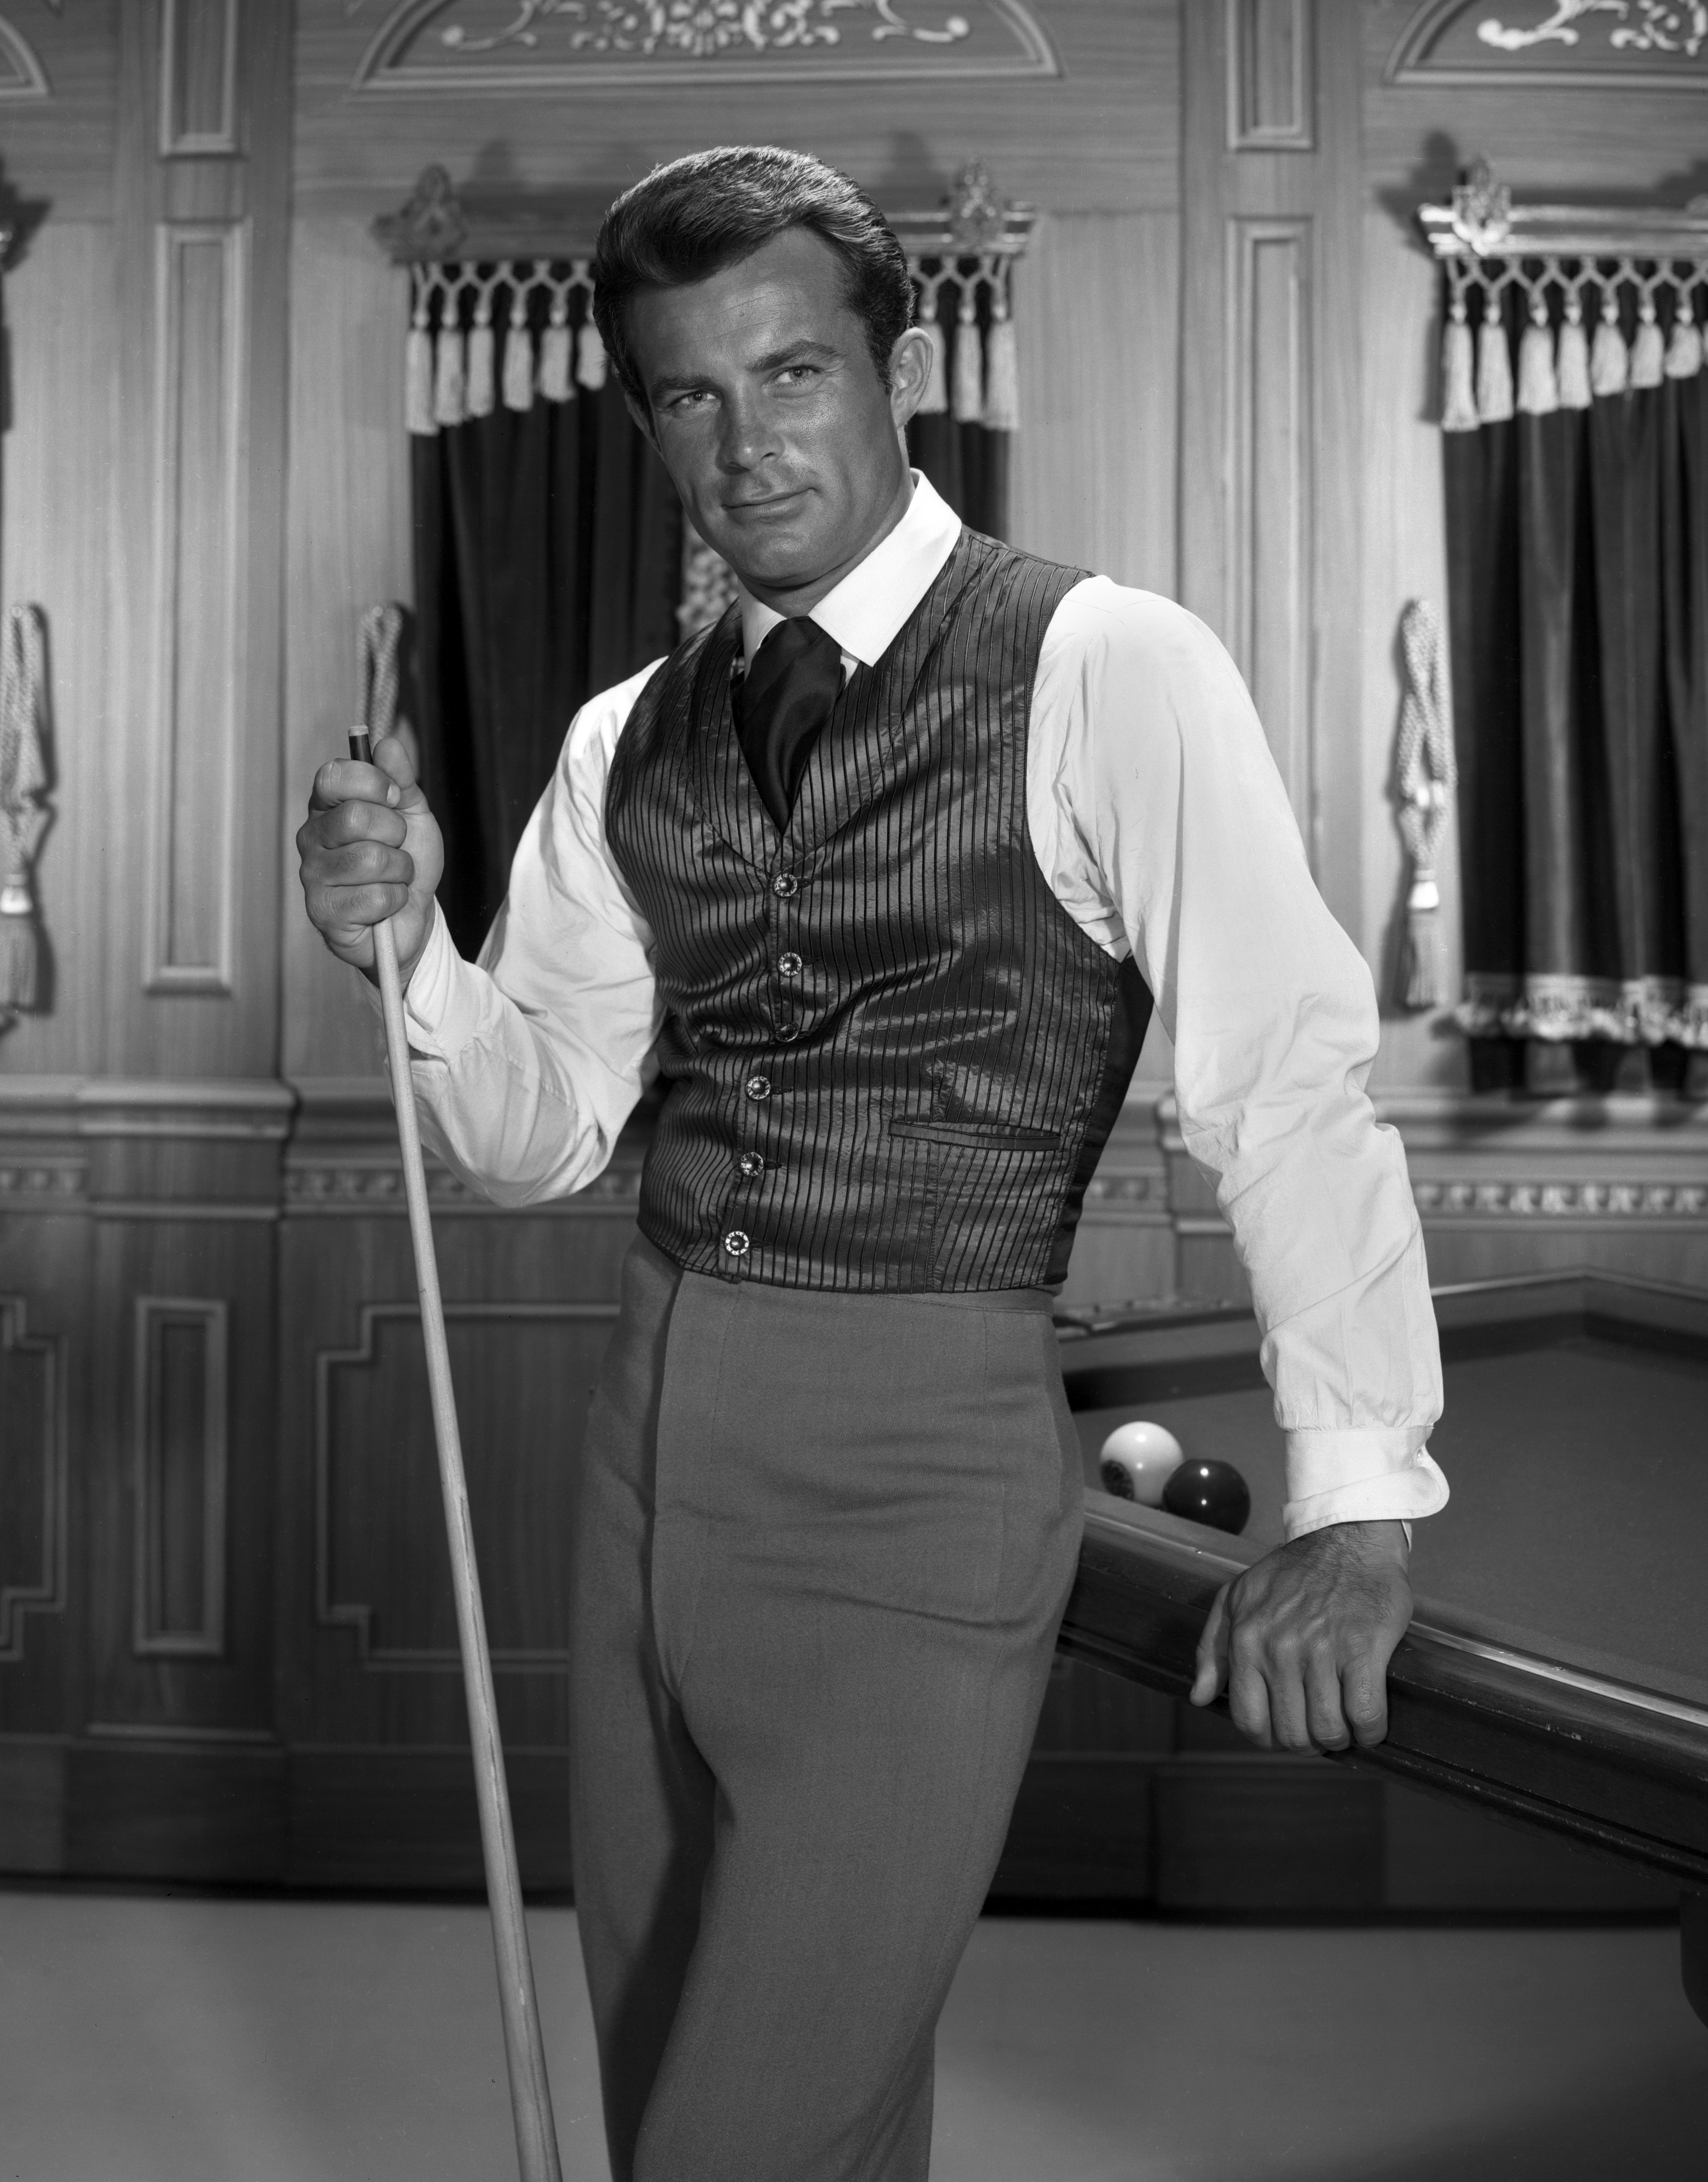 Robert Conrad as James T. West in the CBS television show, "The Wild Wild West" on April 22, 1965 in Hollywood, California